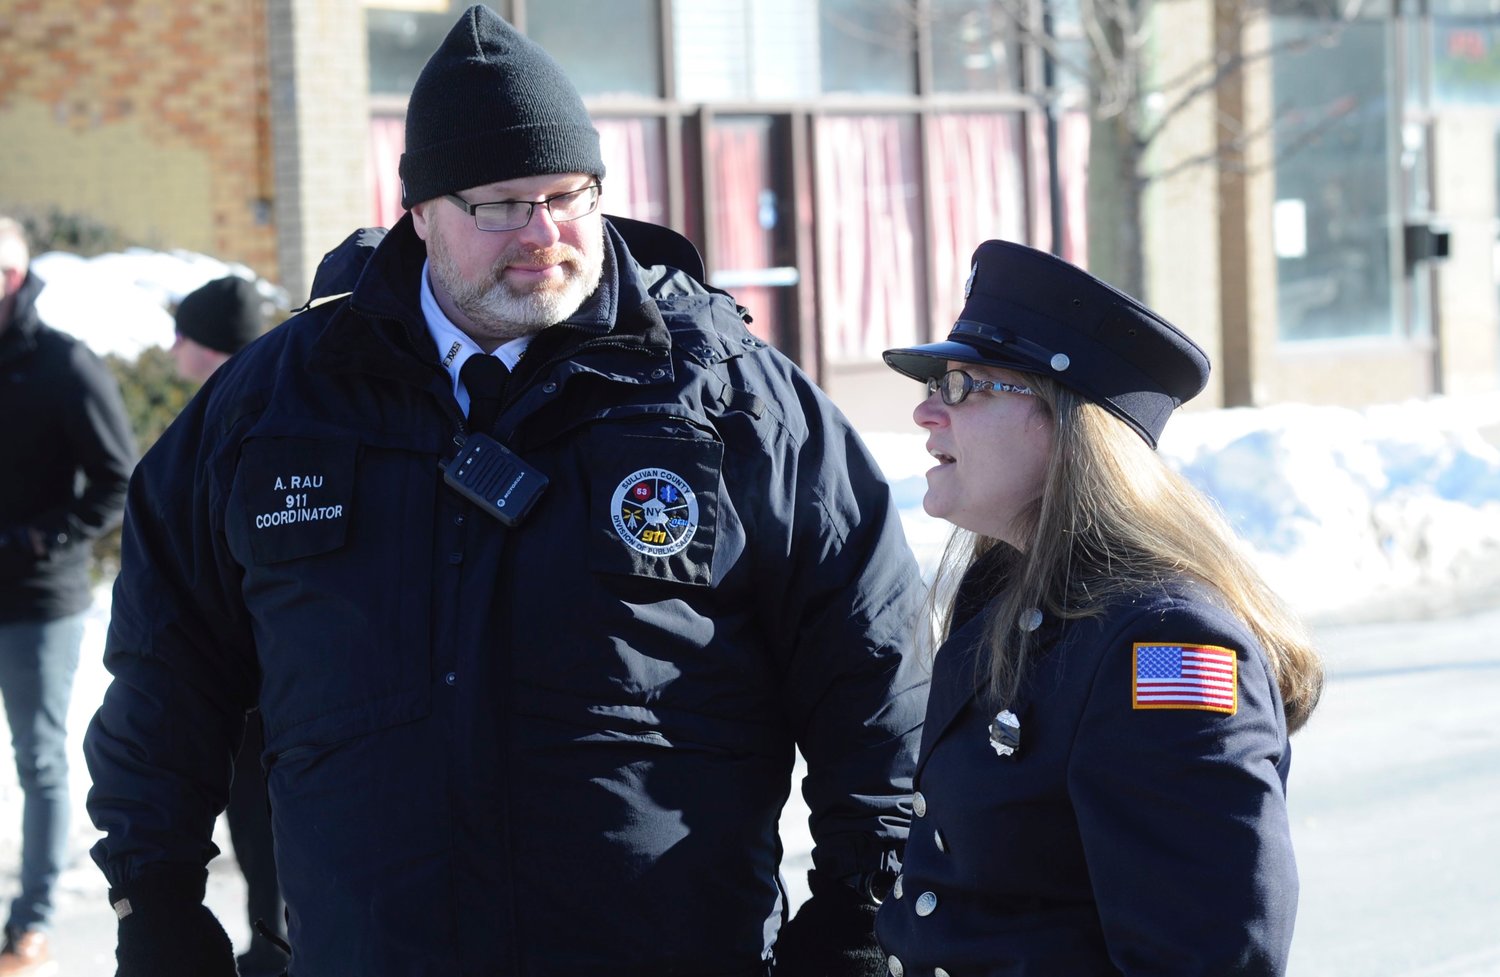 Alex Rau, Sullivan County EMS coordinator, is pictured with Megan Sauer, a firefighter from the Liberty Fire Department, at the February 22 memorial service for William “Billy” Steinberg. Steinberg, a veteran officer with the Forestburgh Fire Department, died in the line of duty while battling a structure fire that was allegedly sparked by an arsonist...